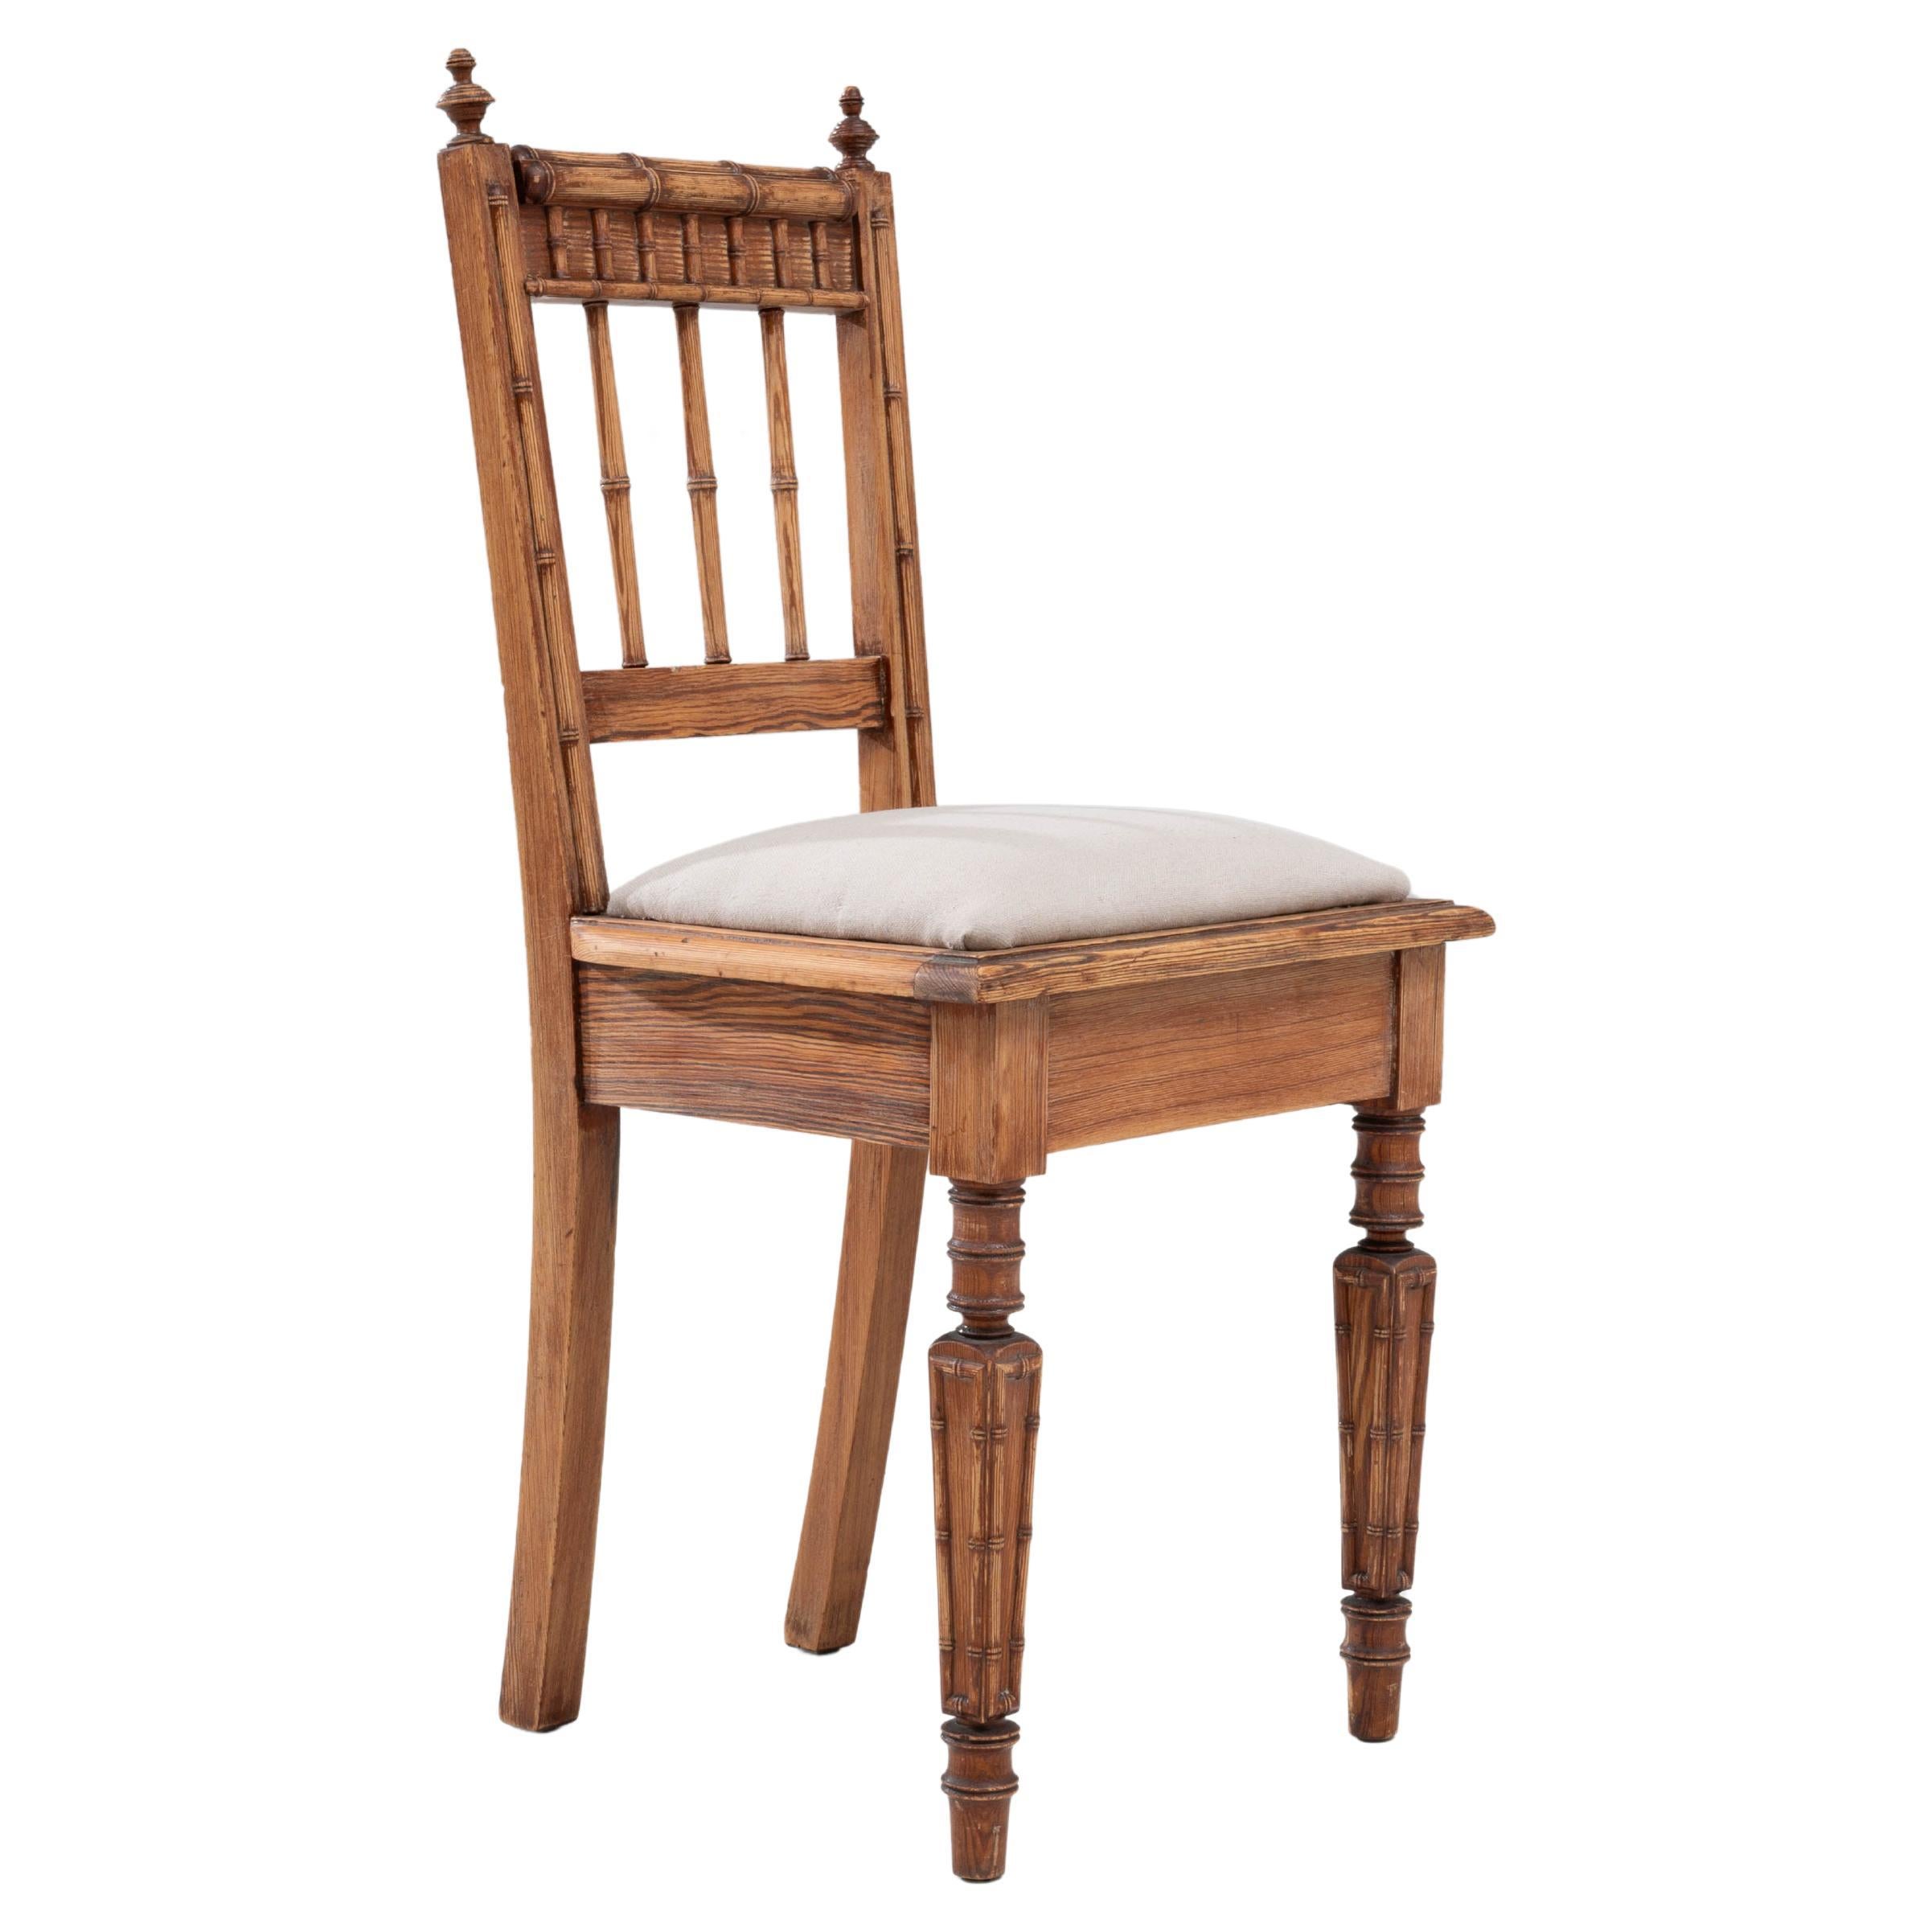 19th Century French Wooden Chair With Upholstered Seat For Sale